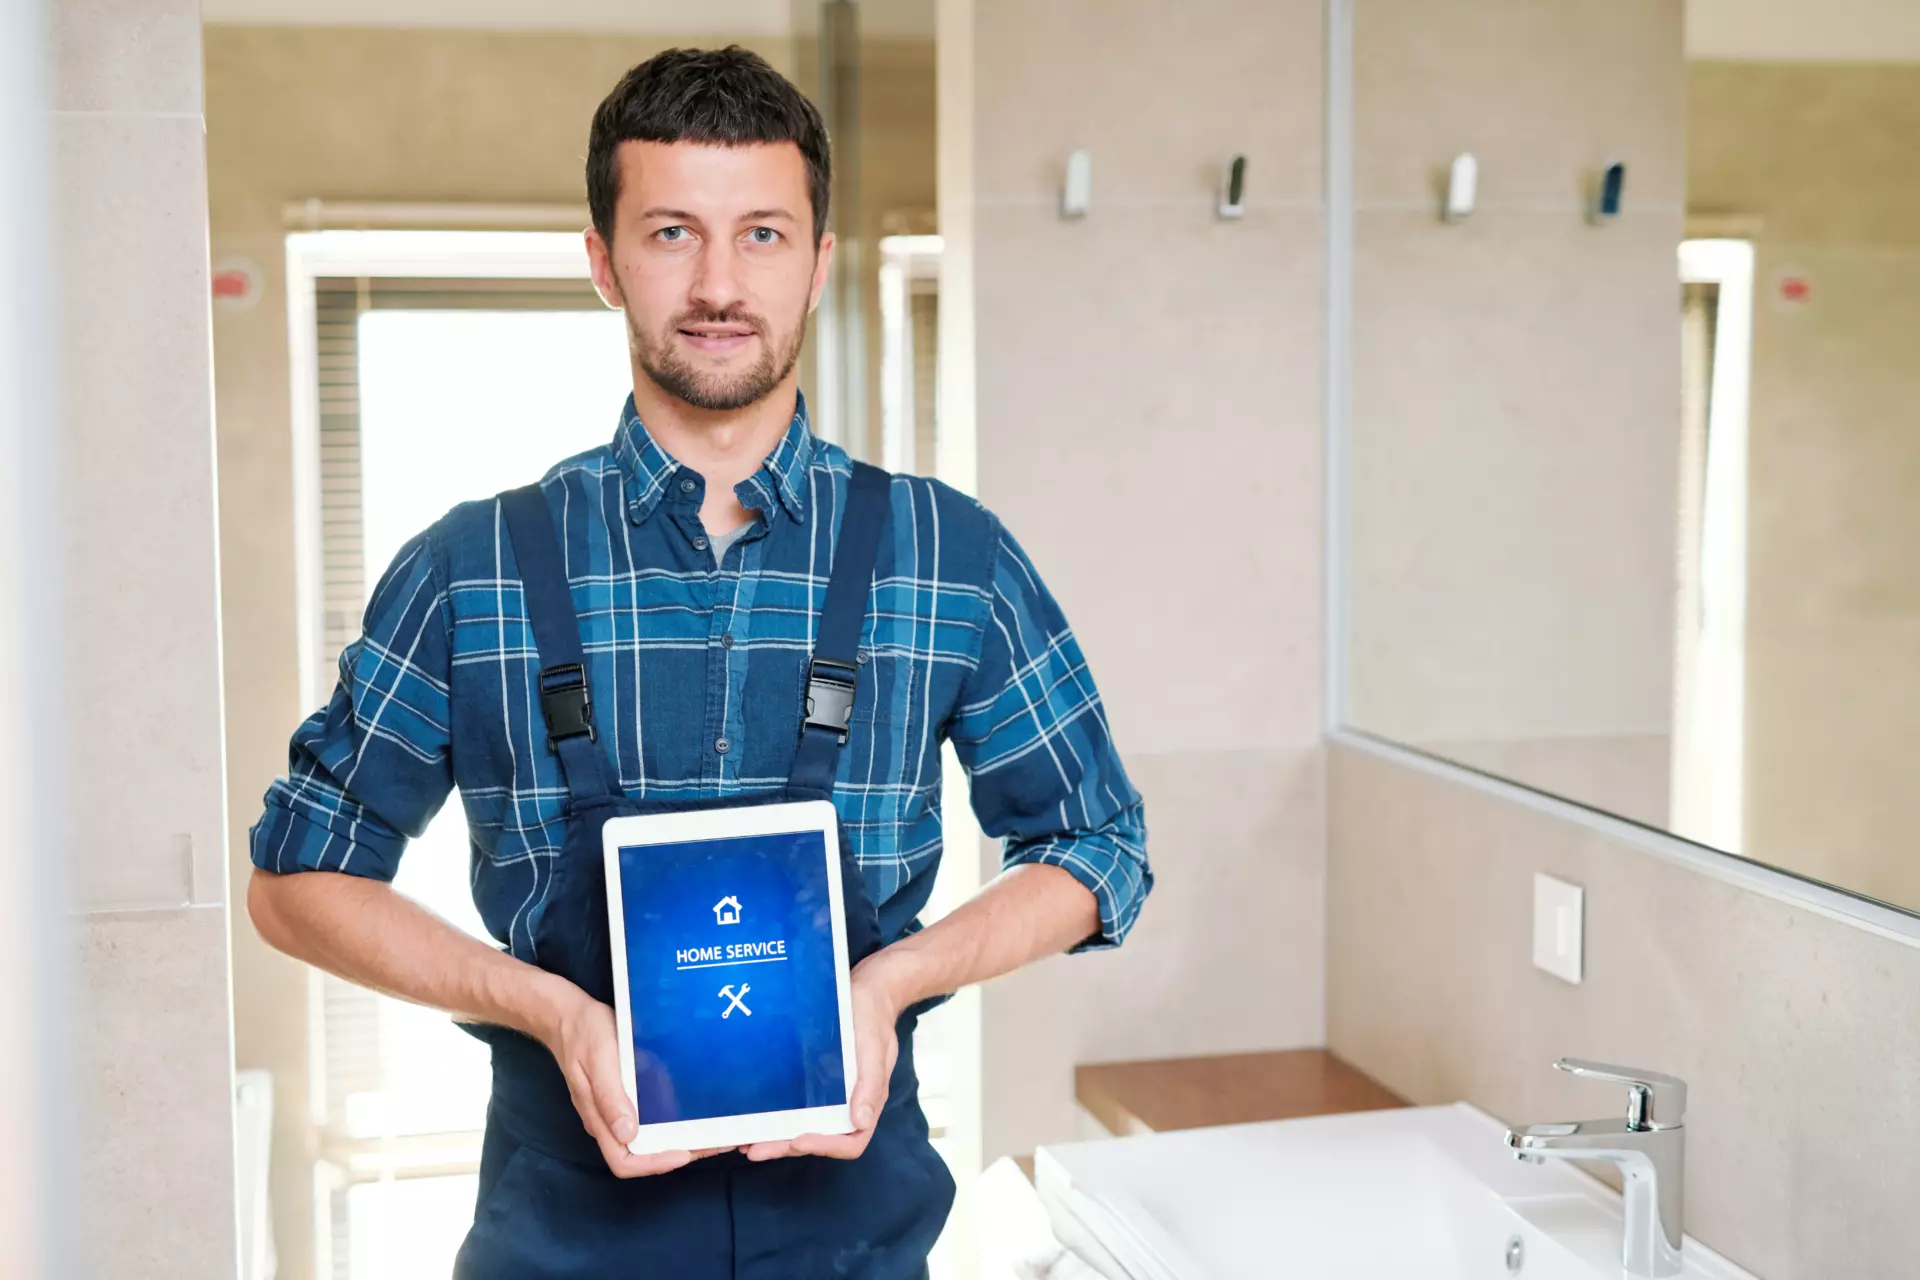 A man in work overalls and a blue flannel shirt stands in a bathroom holding a tablet.